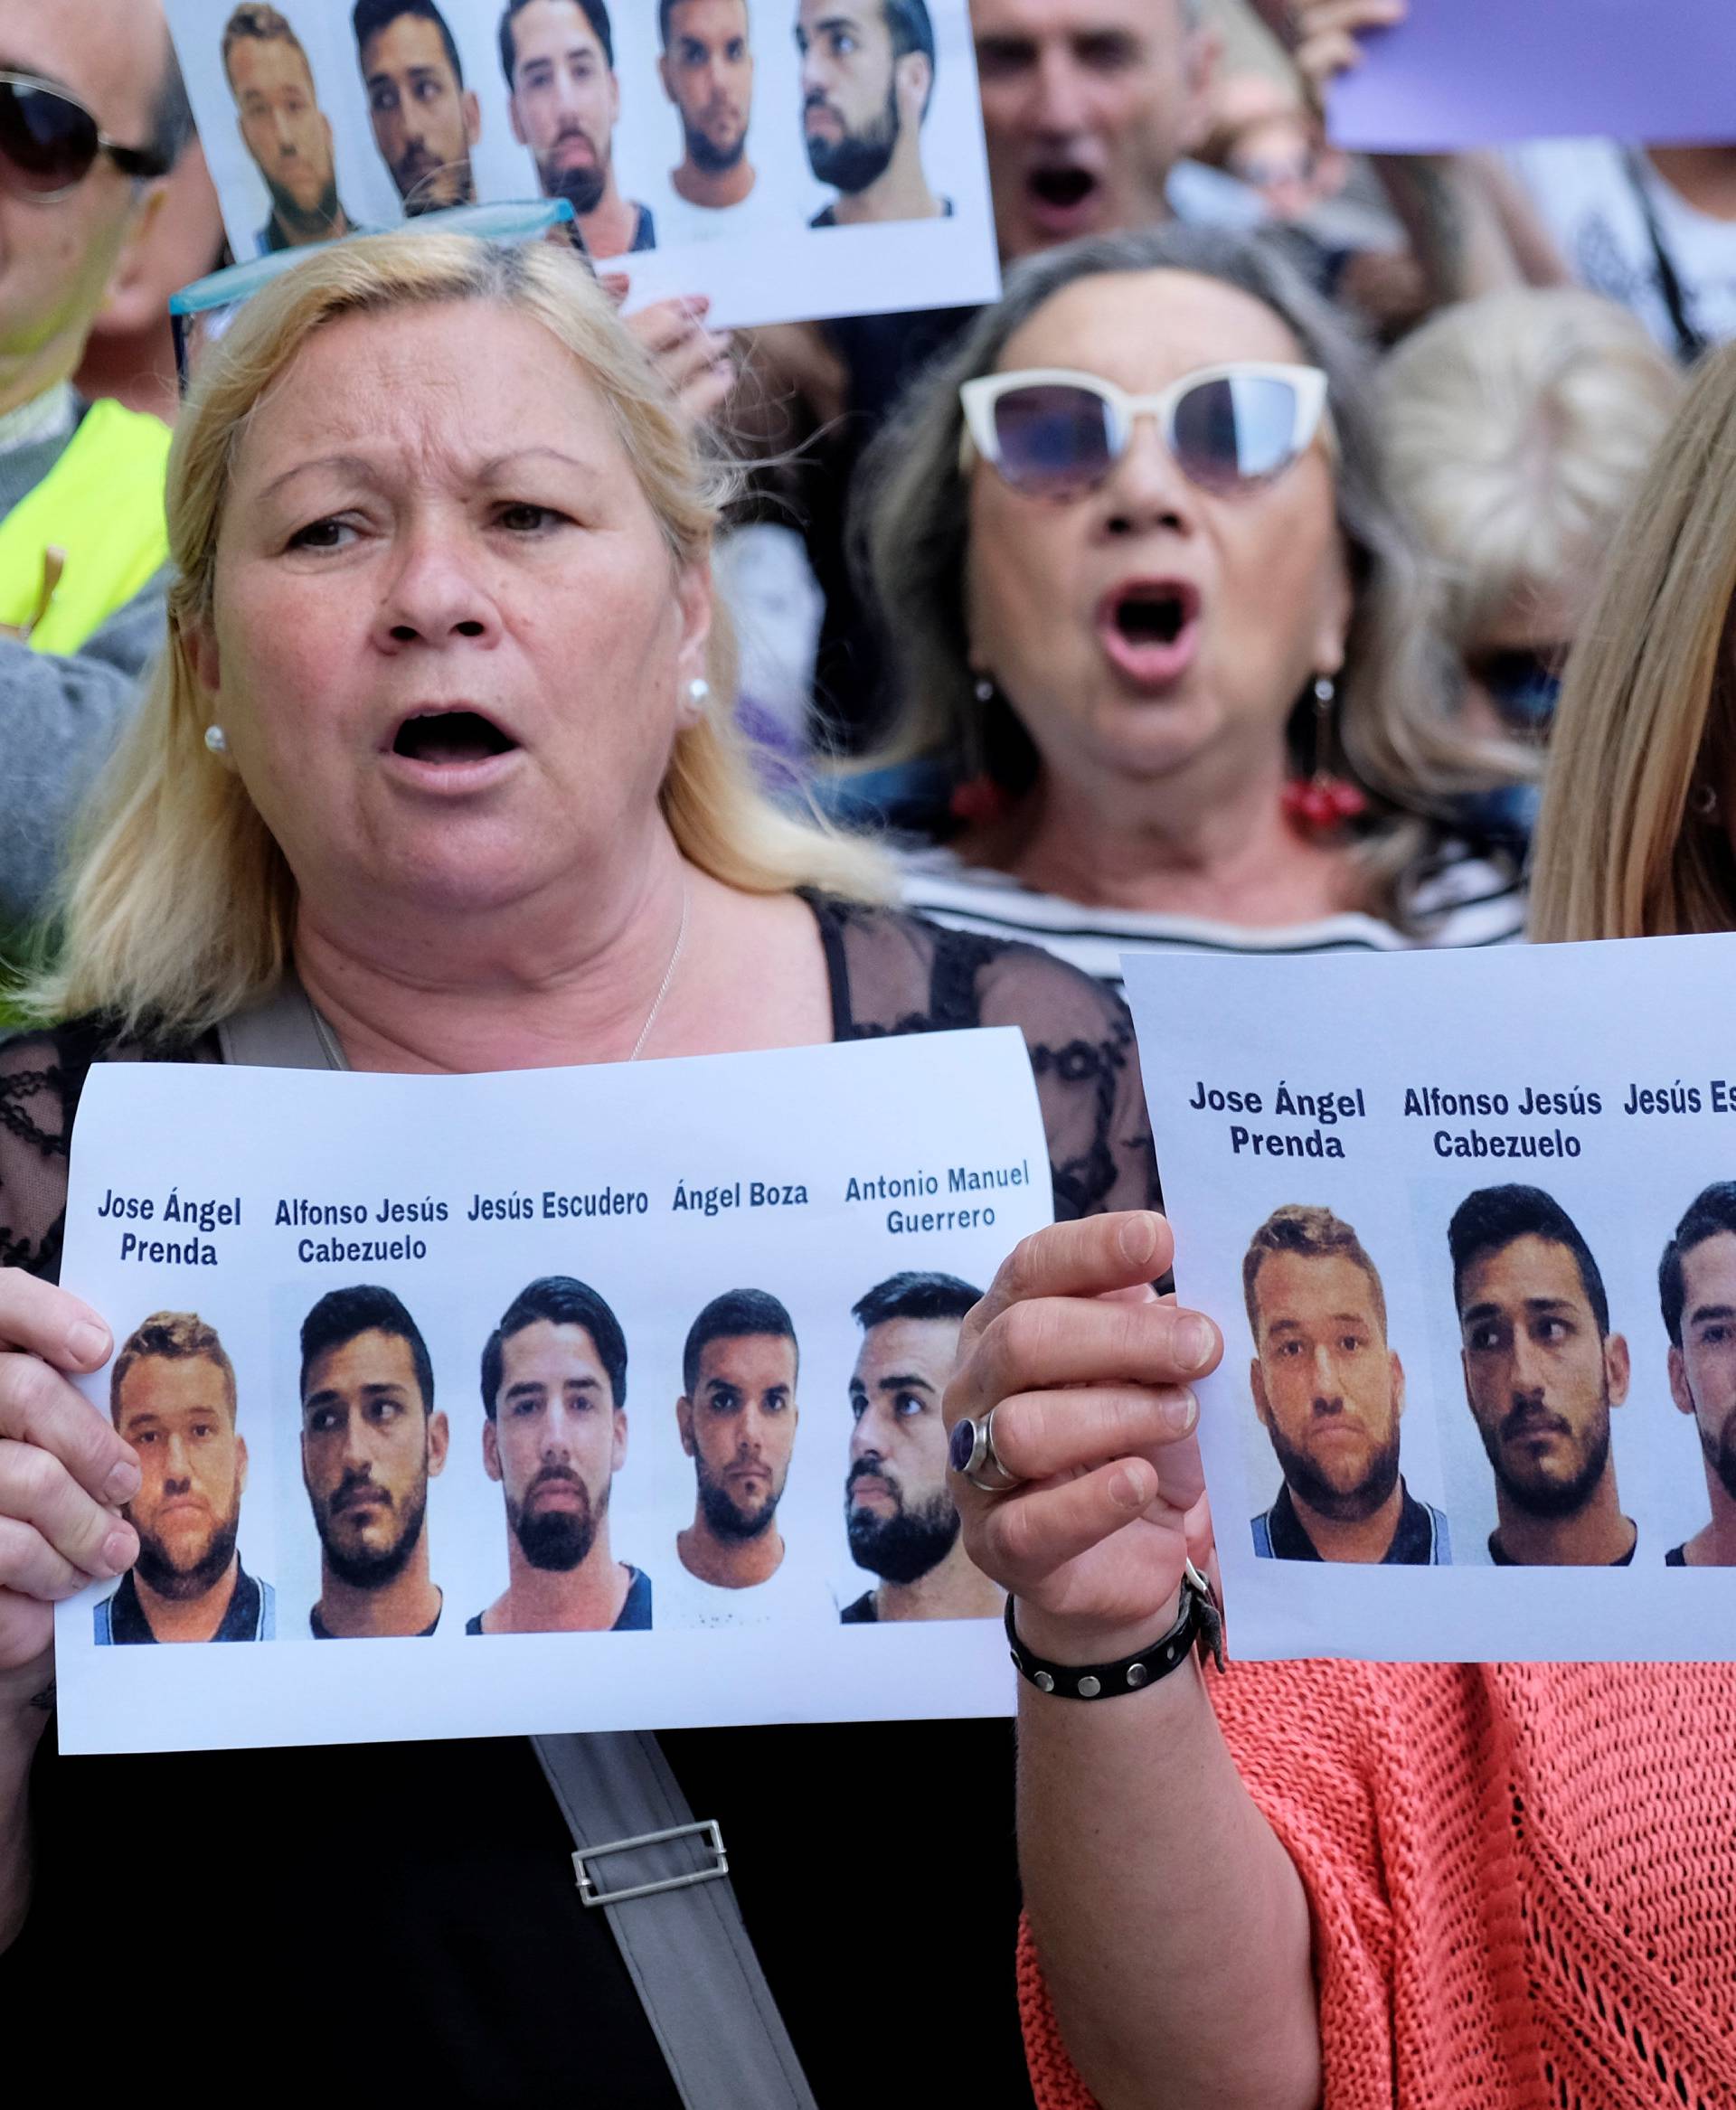 People shout slogans while holding signs during a protest outside the City of Justice in Valencia